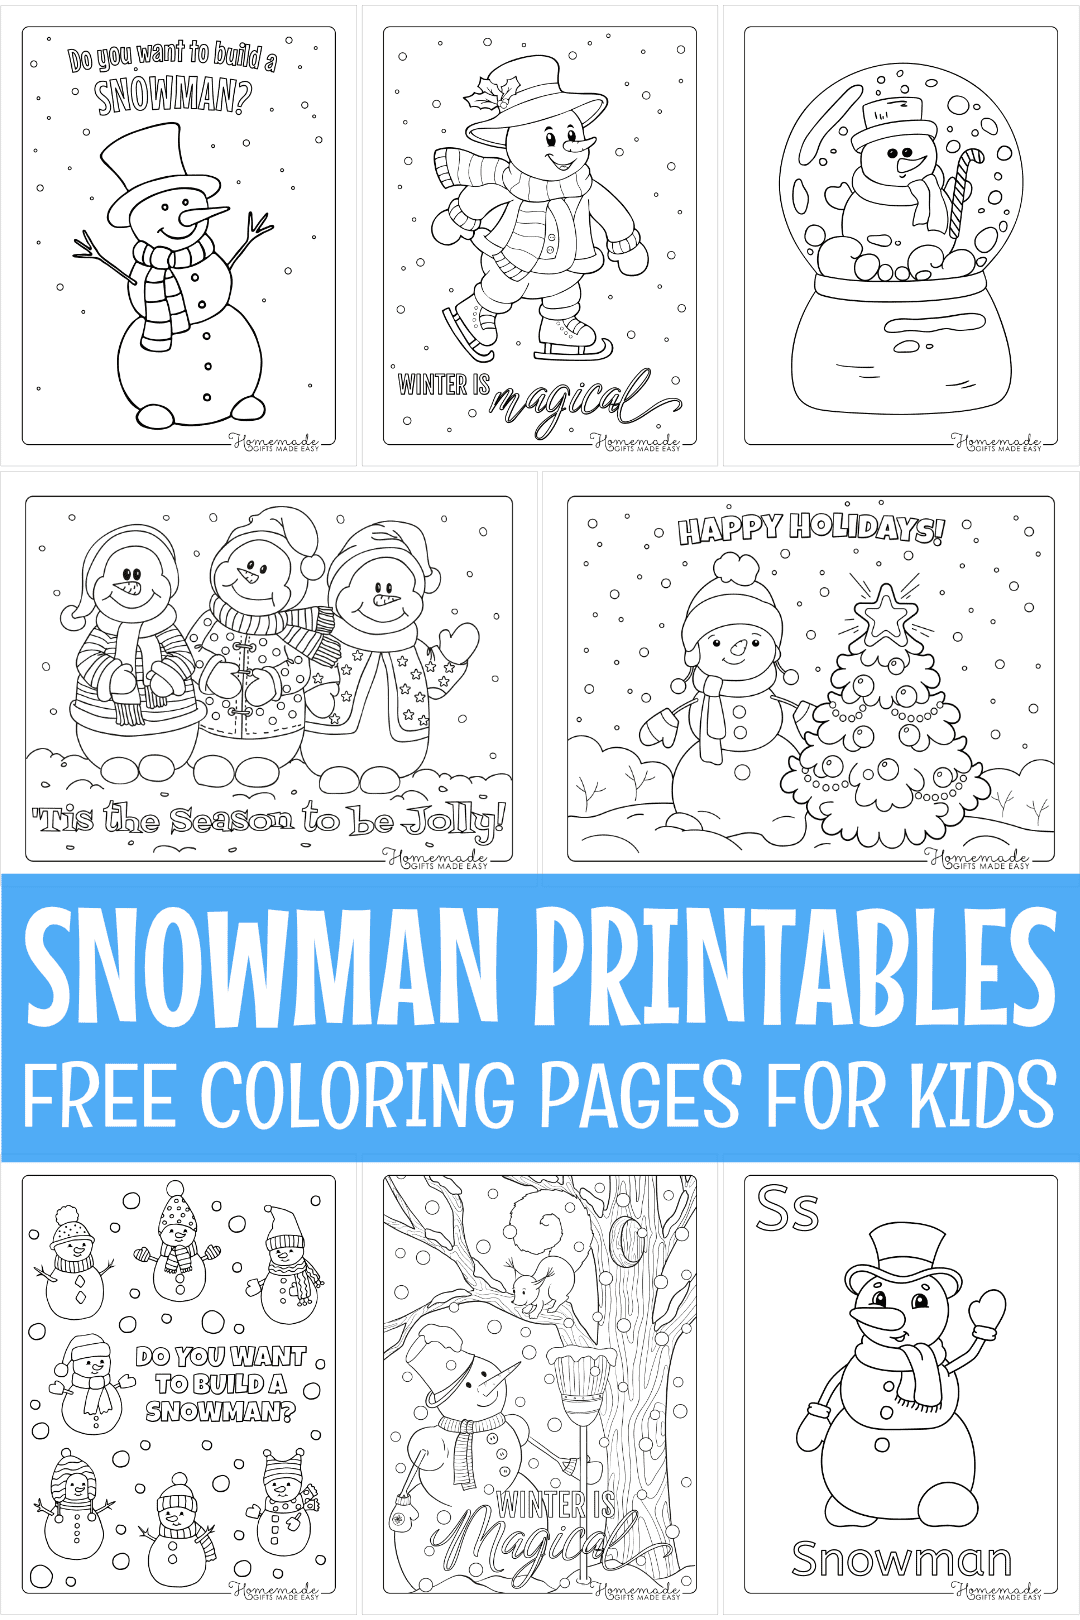 free printable snoman coloring pages - 60+ designs